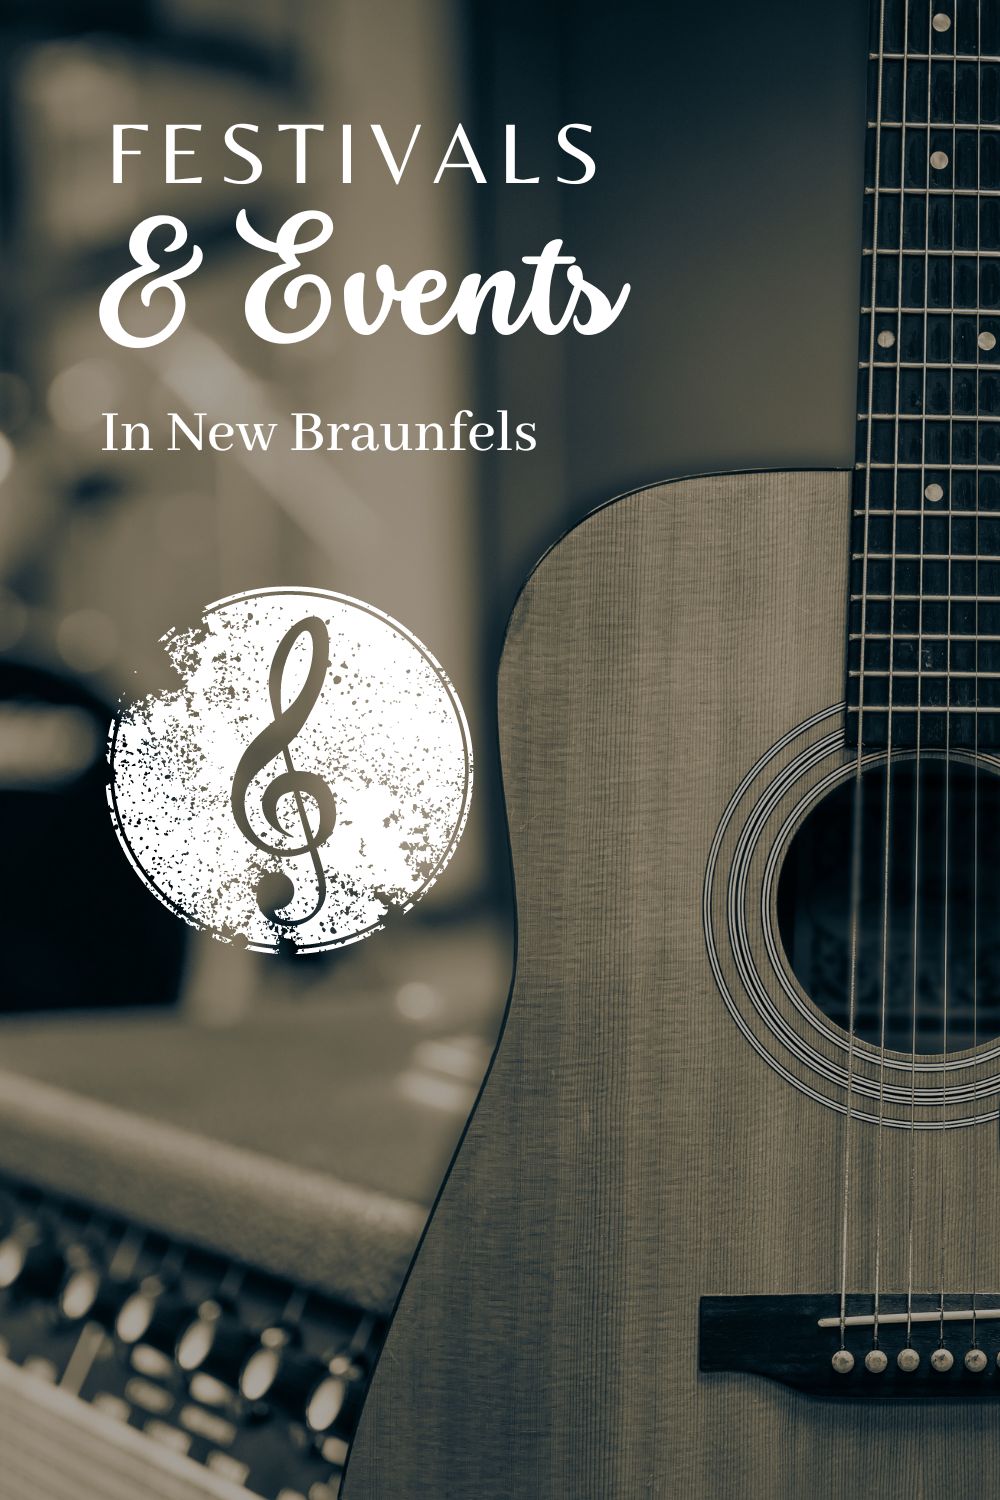 Festivals & Events in New Braunfels Texas 